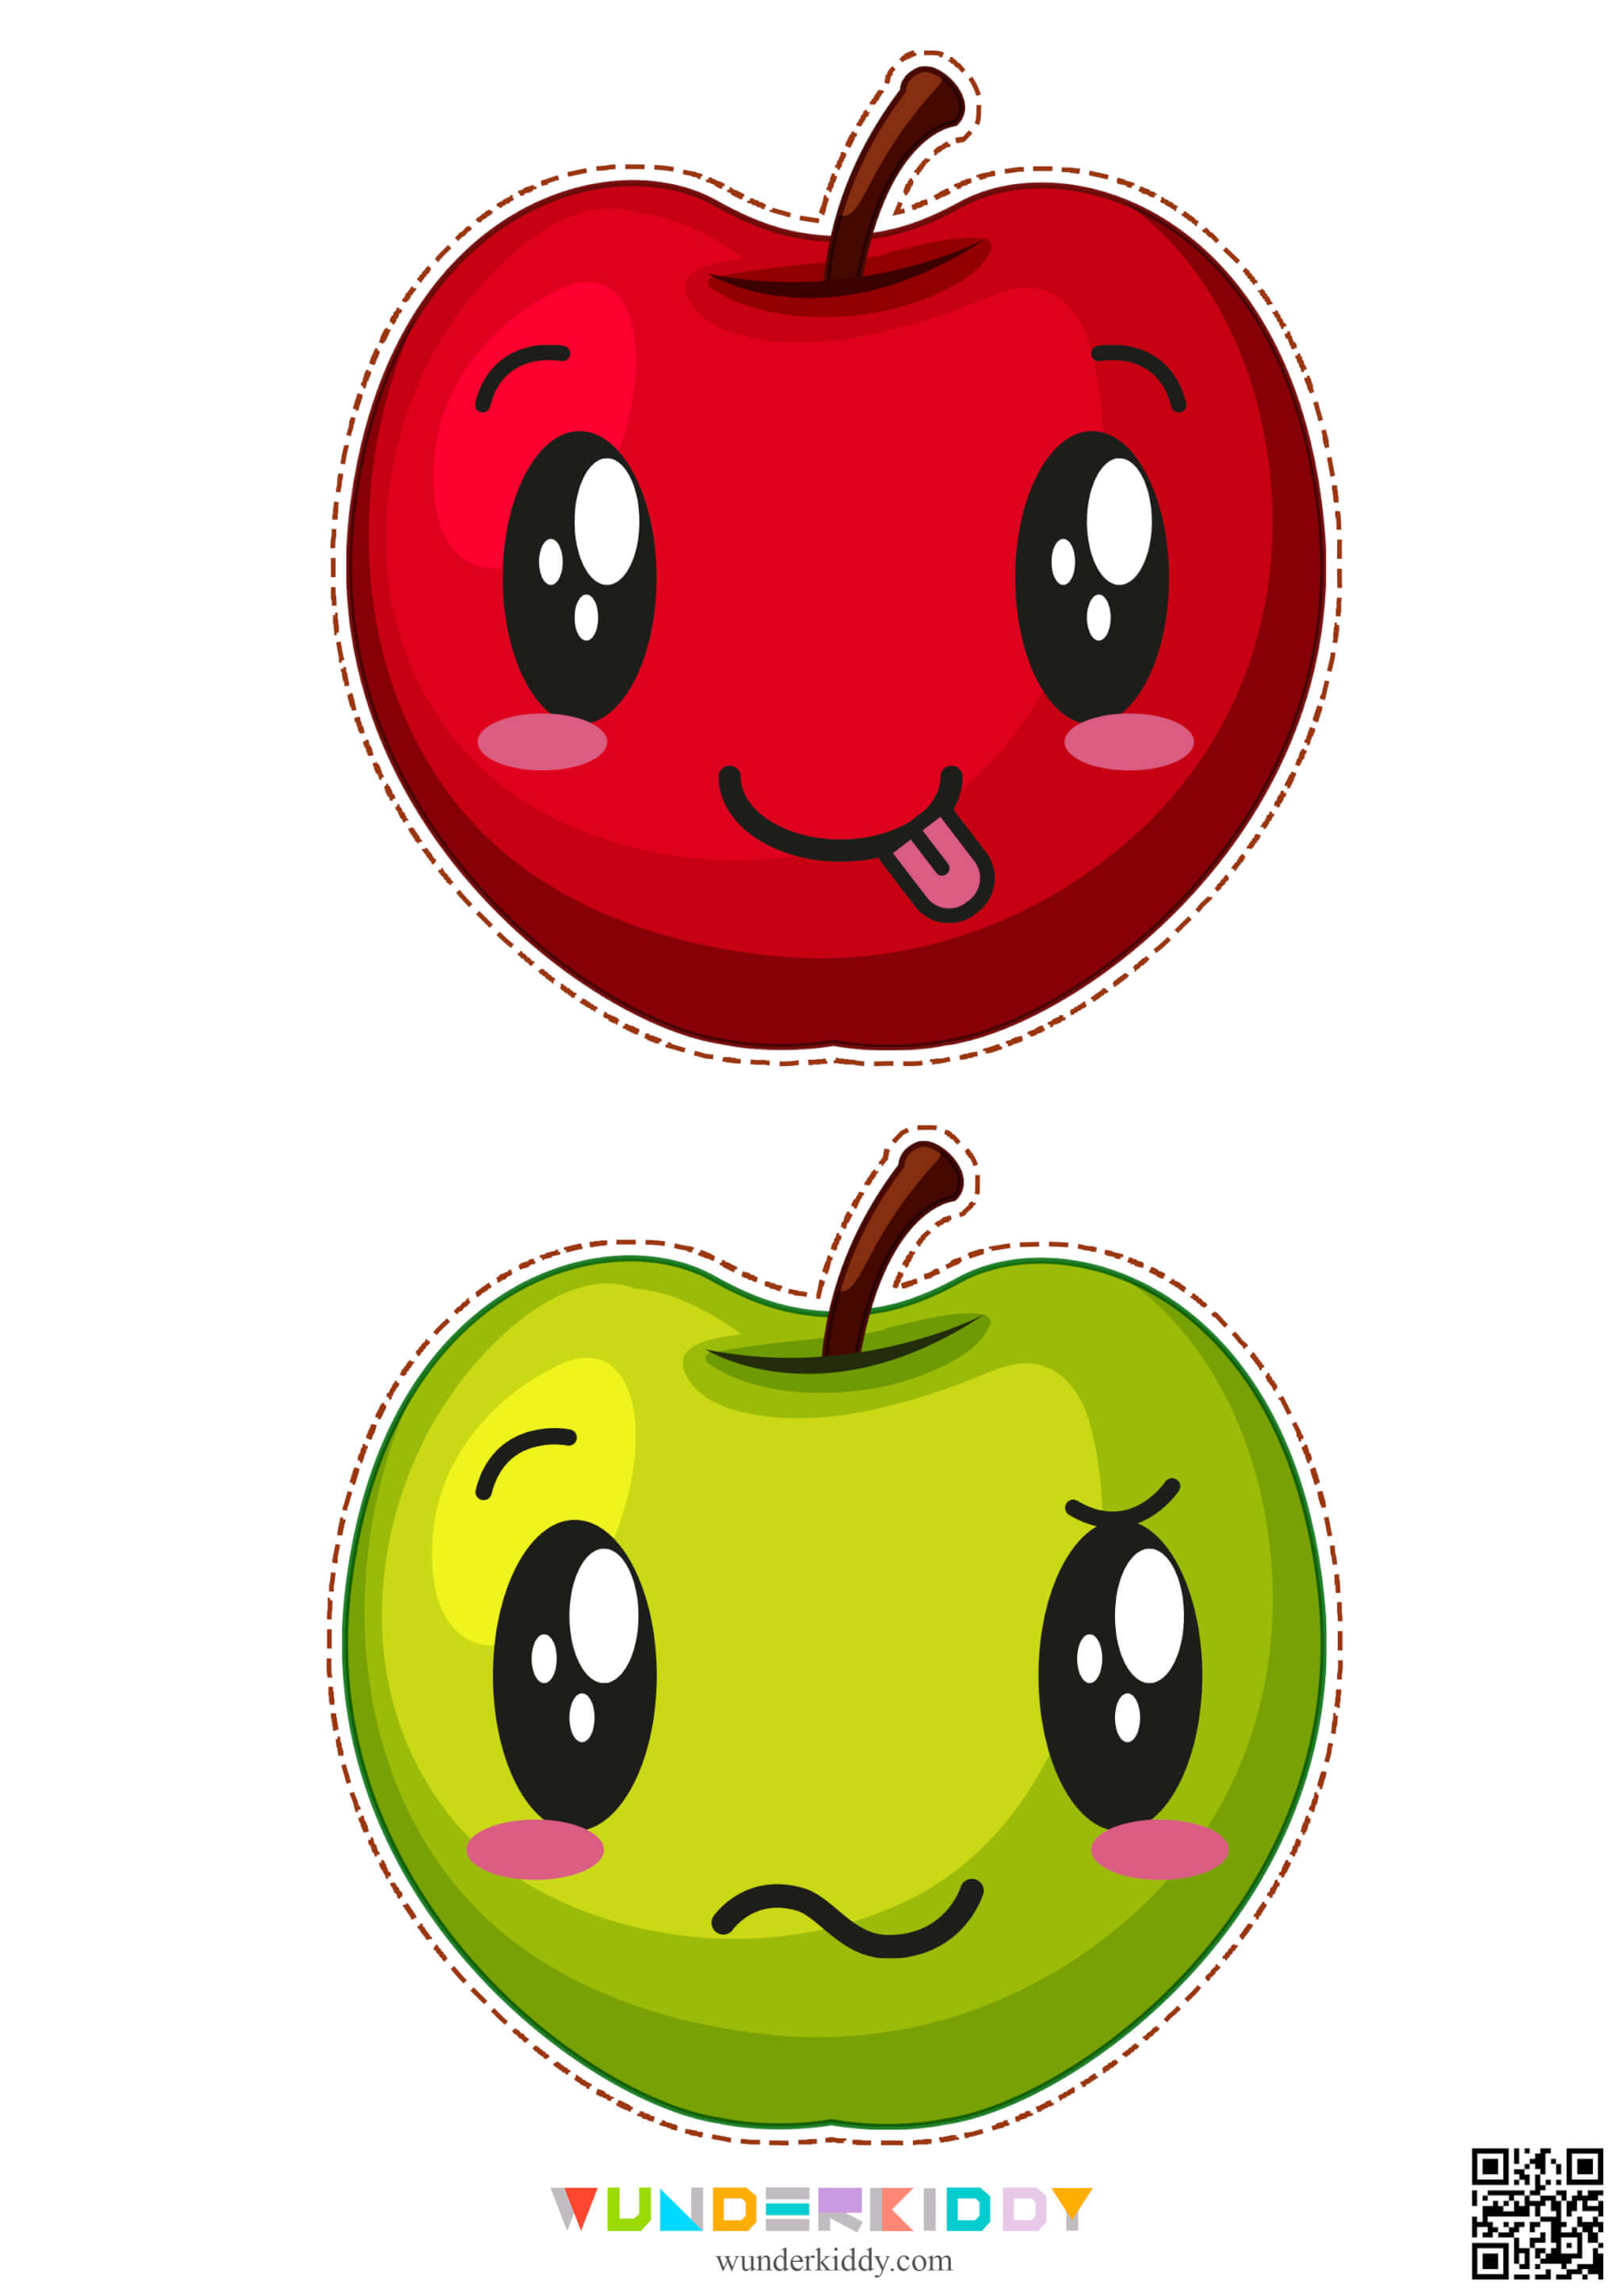 Template «Apples» - Image 6